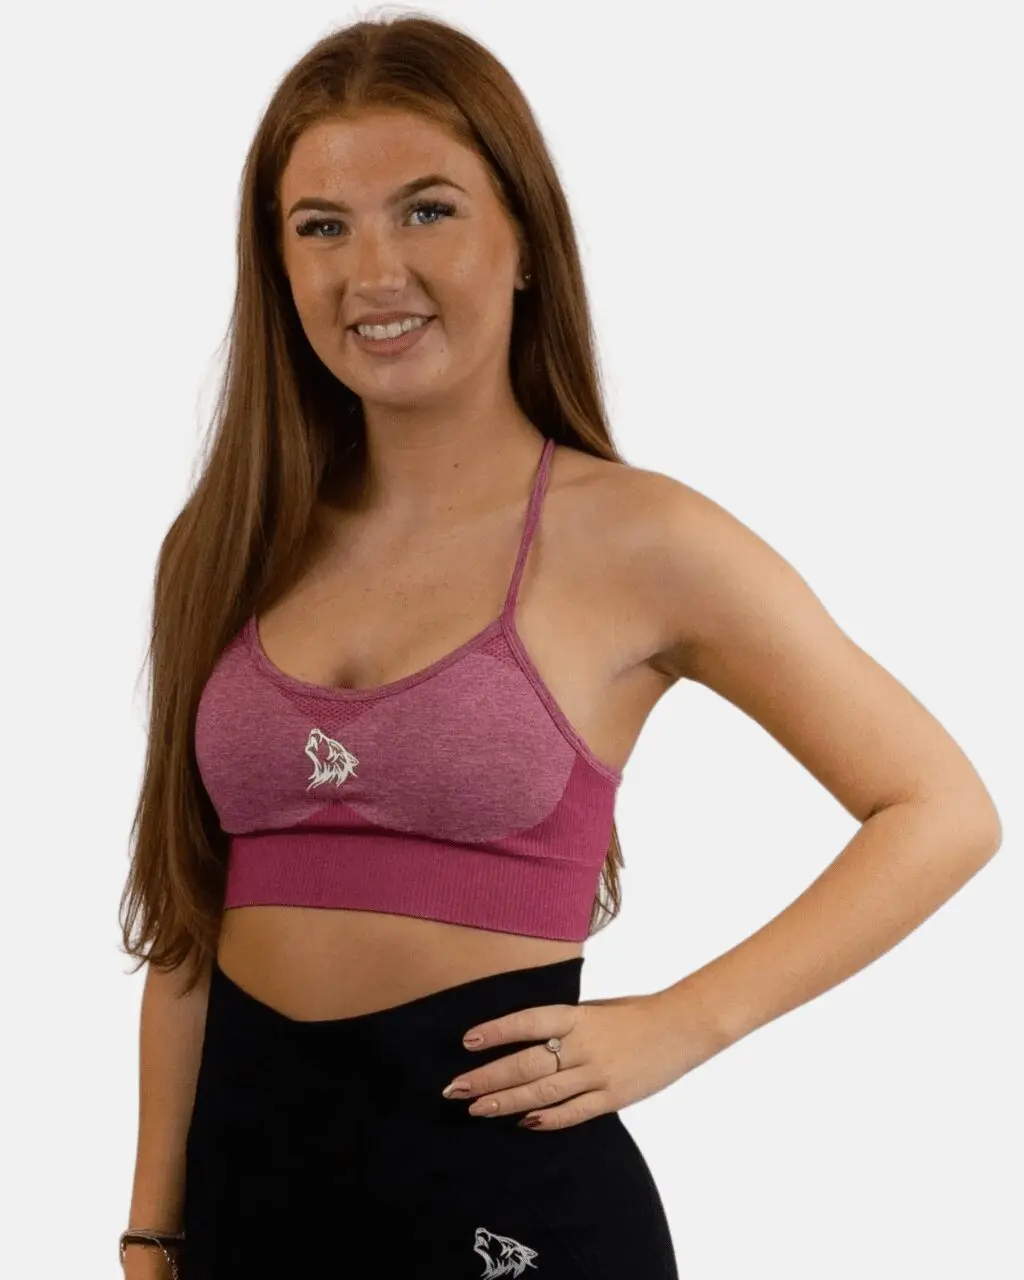 A woman wearing a pink sports bra posing for the camera.